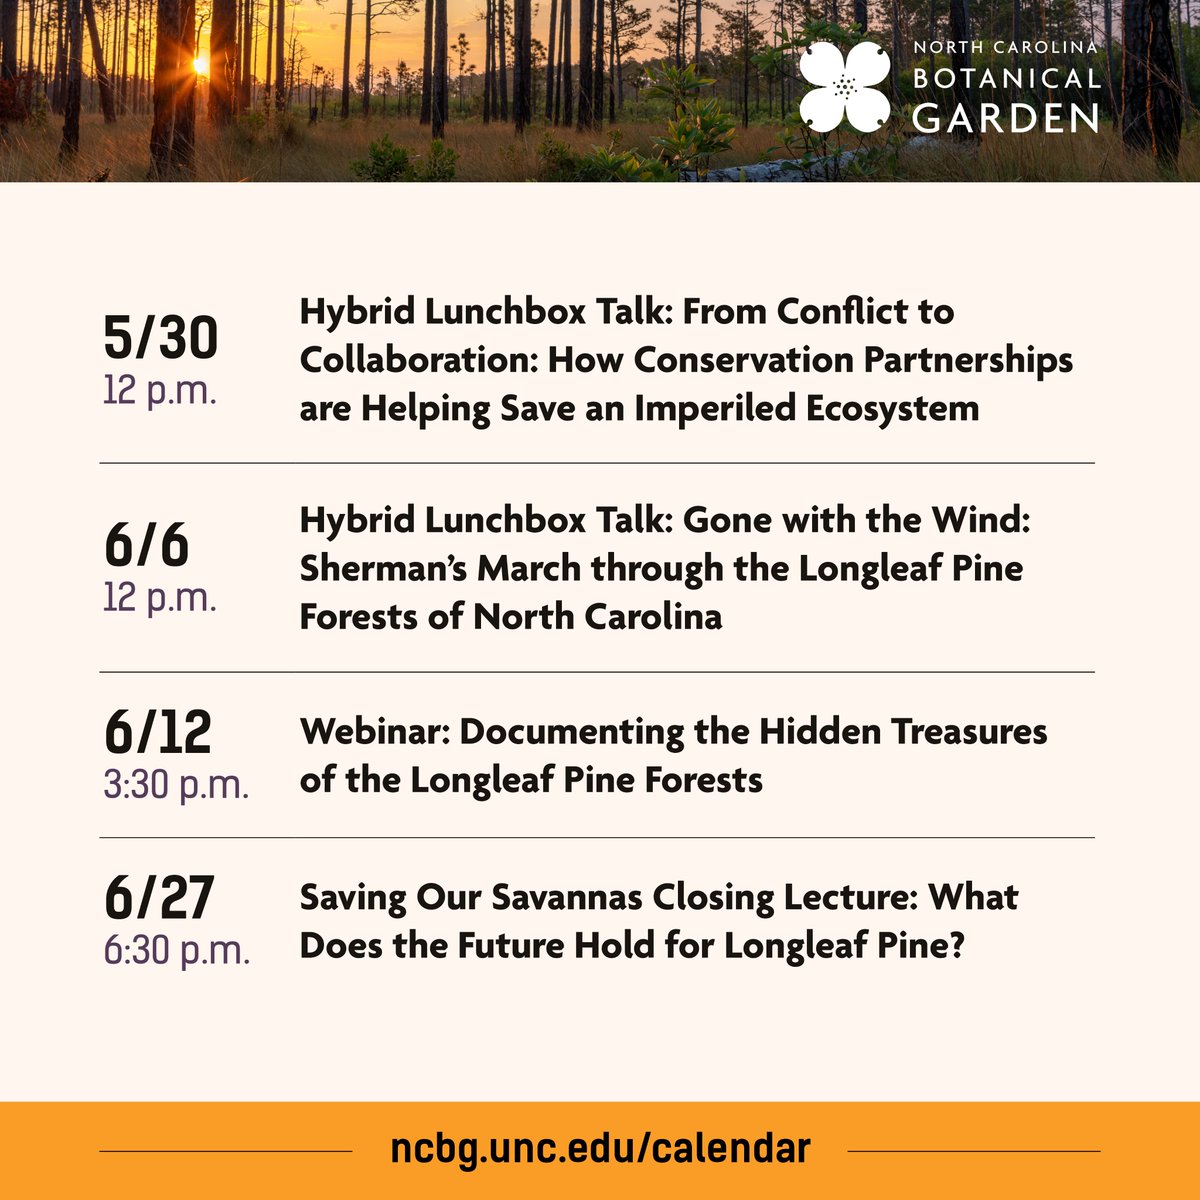 We've got lots of of #SavingOurSavannas events coming up, including two tomorrow (Thursday 5/9)! Most of these programs are free to attend, and many have a Zoom option. Learn more and register at ncbg.unc.edu/calendar.